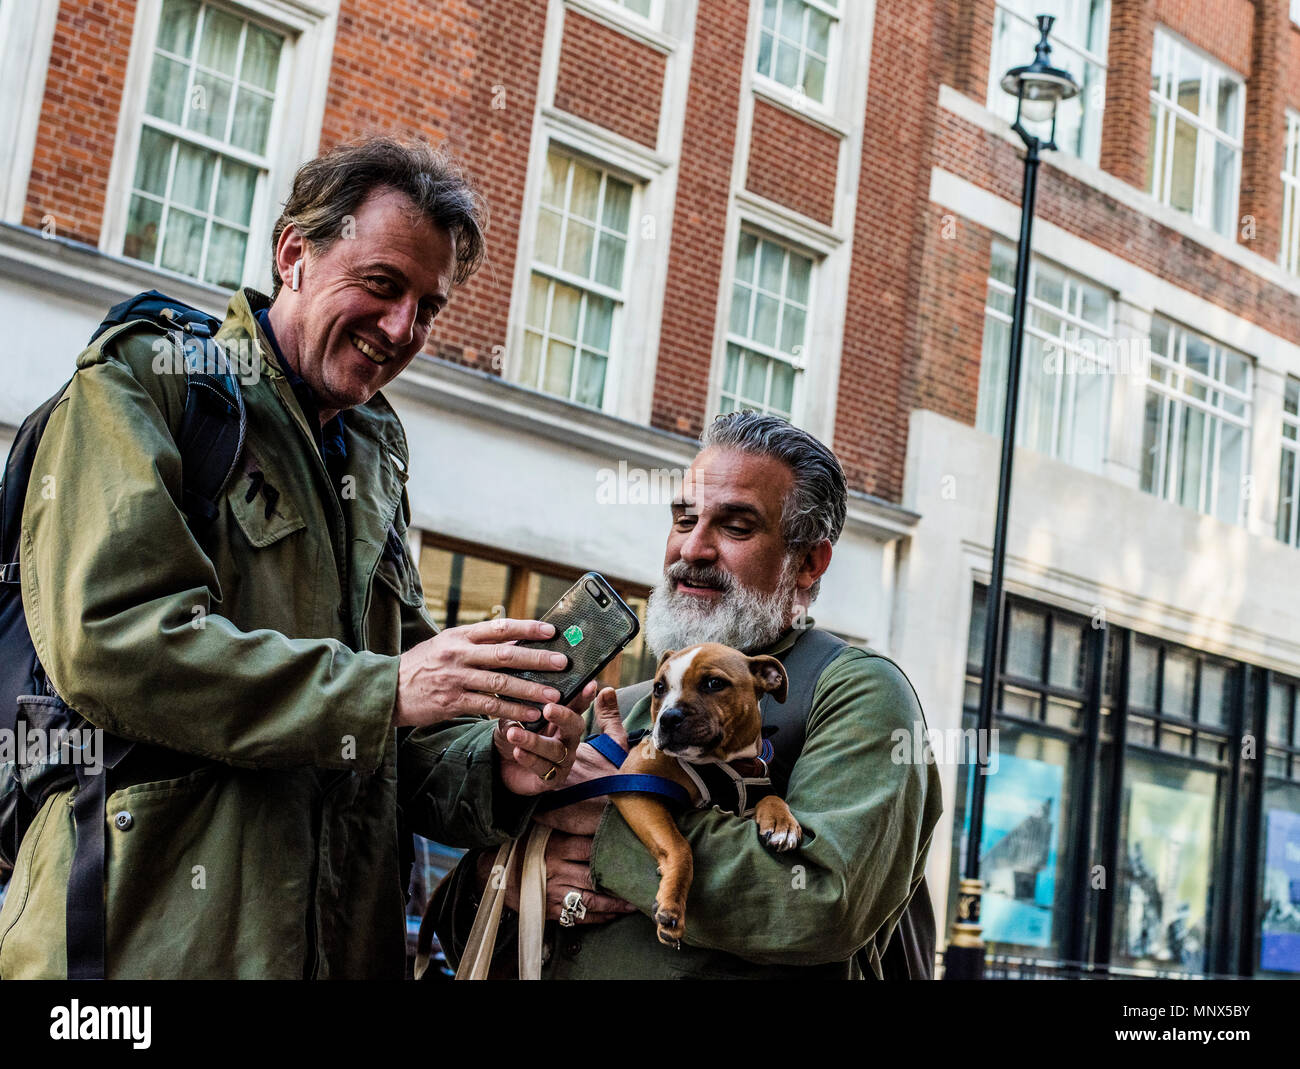 Man looking straight at camera while showing smartphone to friend, friend holding pet dog, smiling with interest, London, England, UK Stock Photo